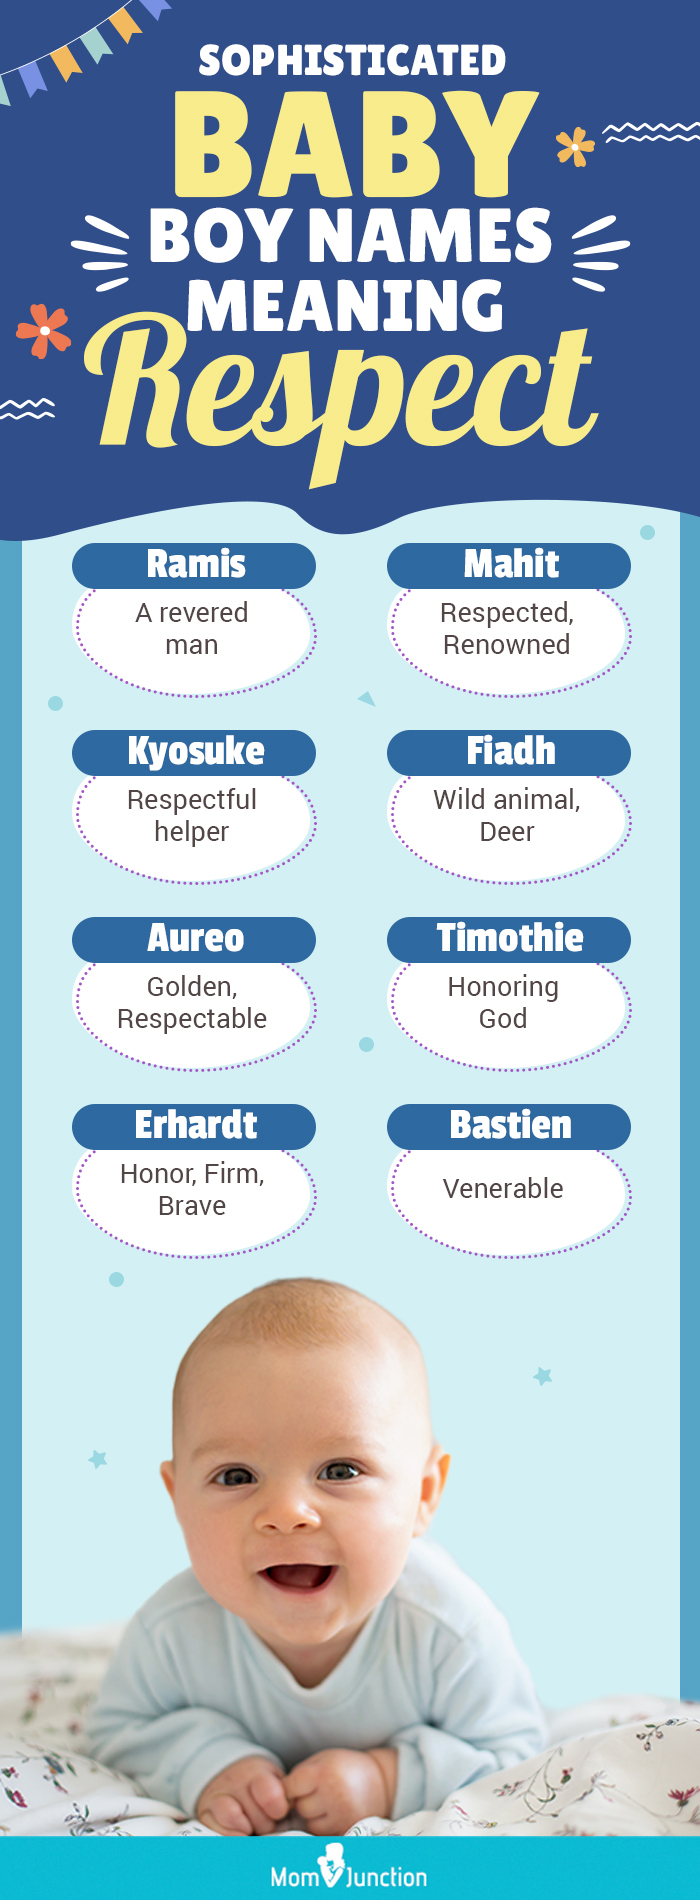 sophisticated baby boy names meaning respect (infographic)